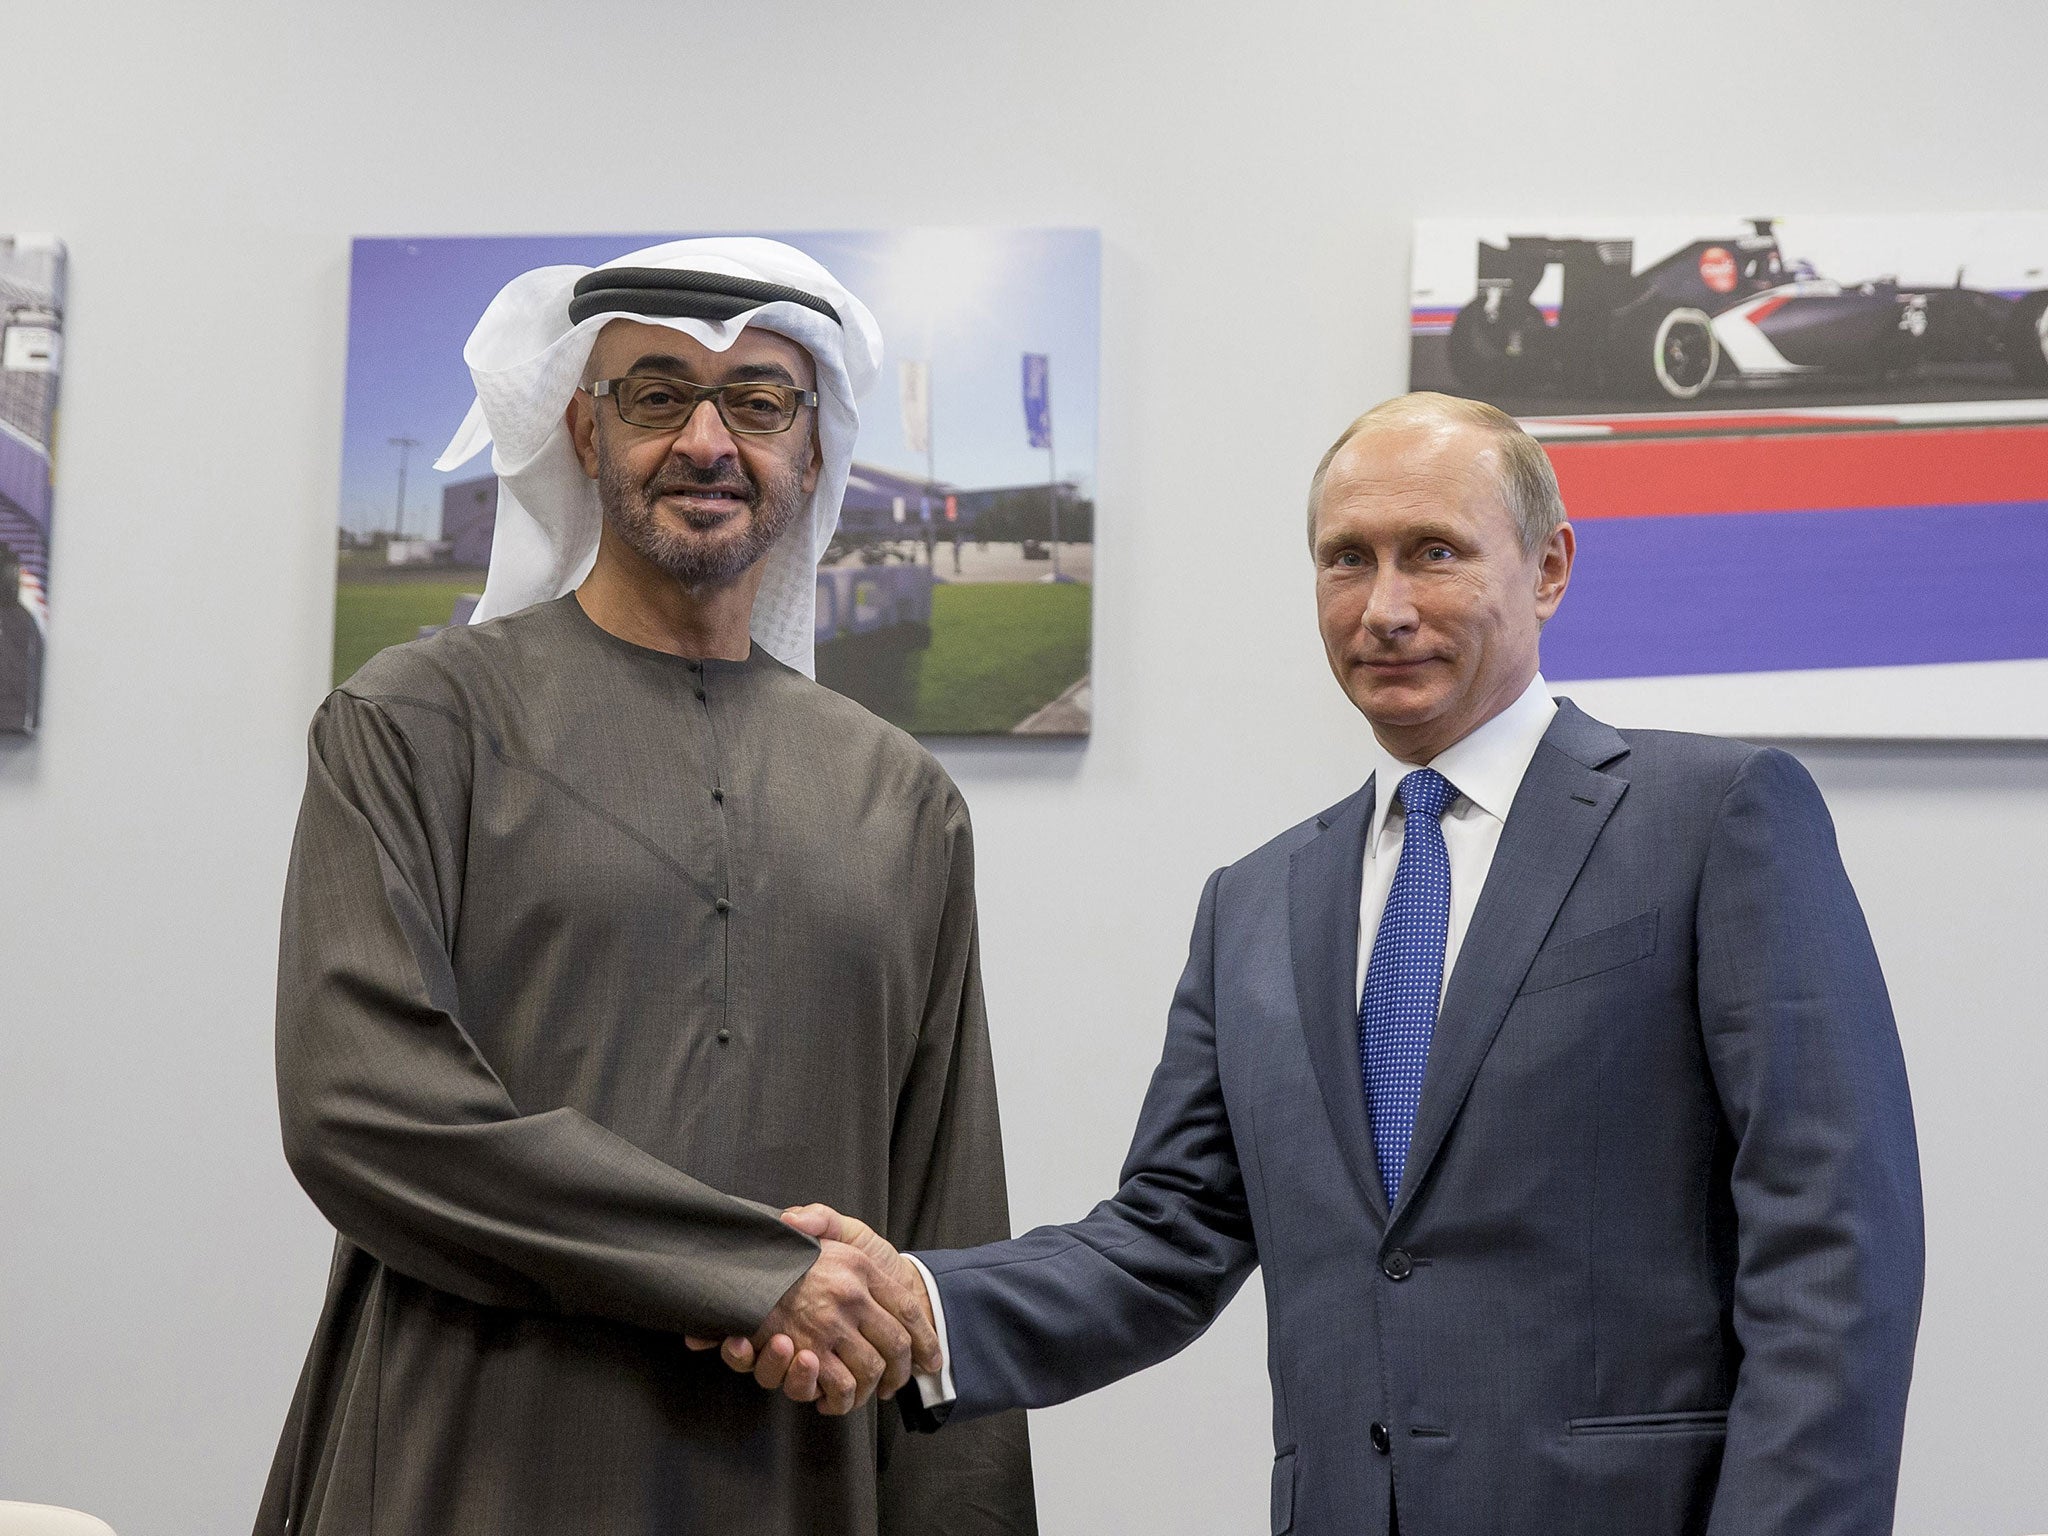 Russian President Vladimir Putin meets Abu Dhabi's Crown Prince Sheikh Mohammed bin Zayed Al Nahyan in Sochi to discuss security in the Middle East and the conflict in Syria, 11 Oct 2015